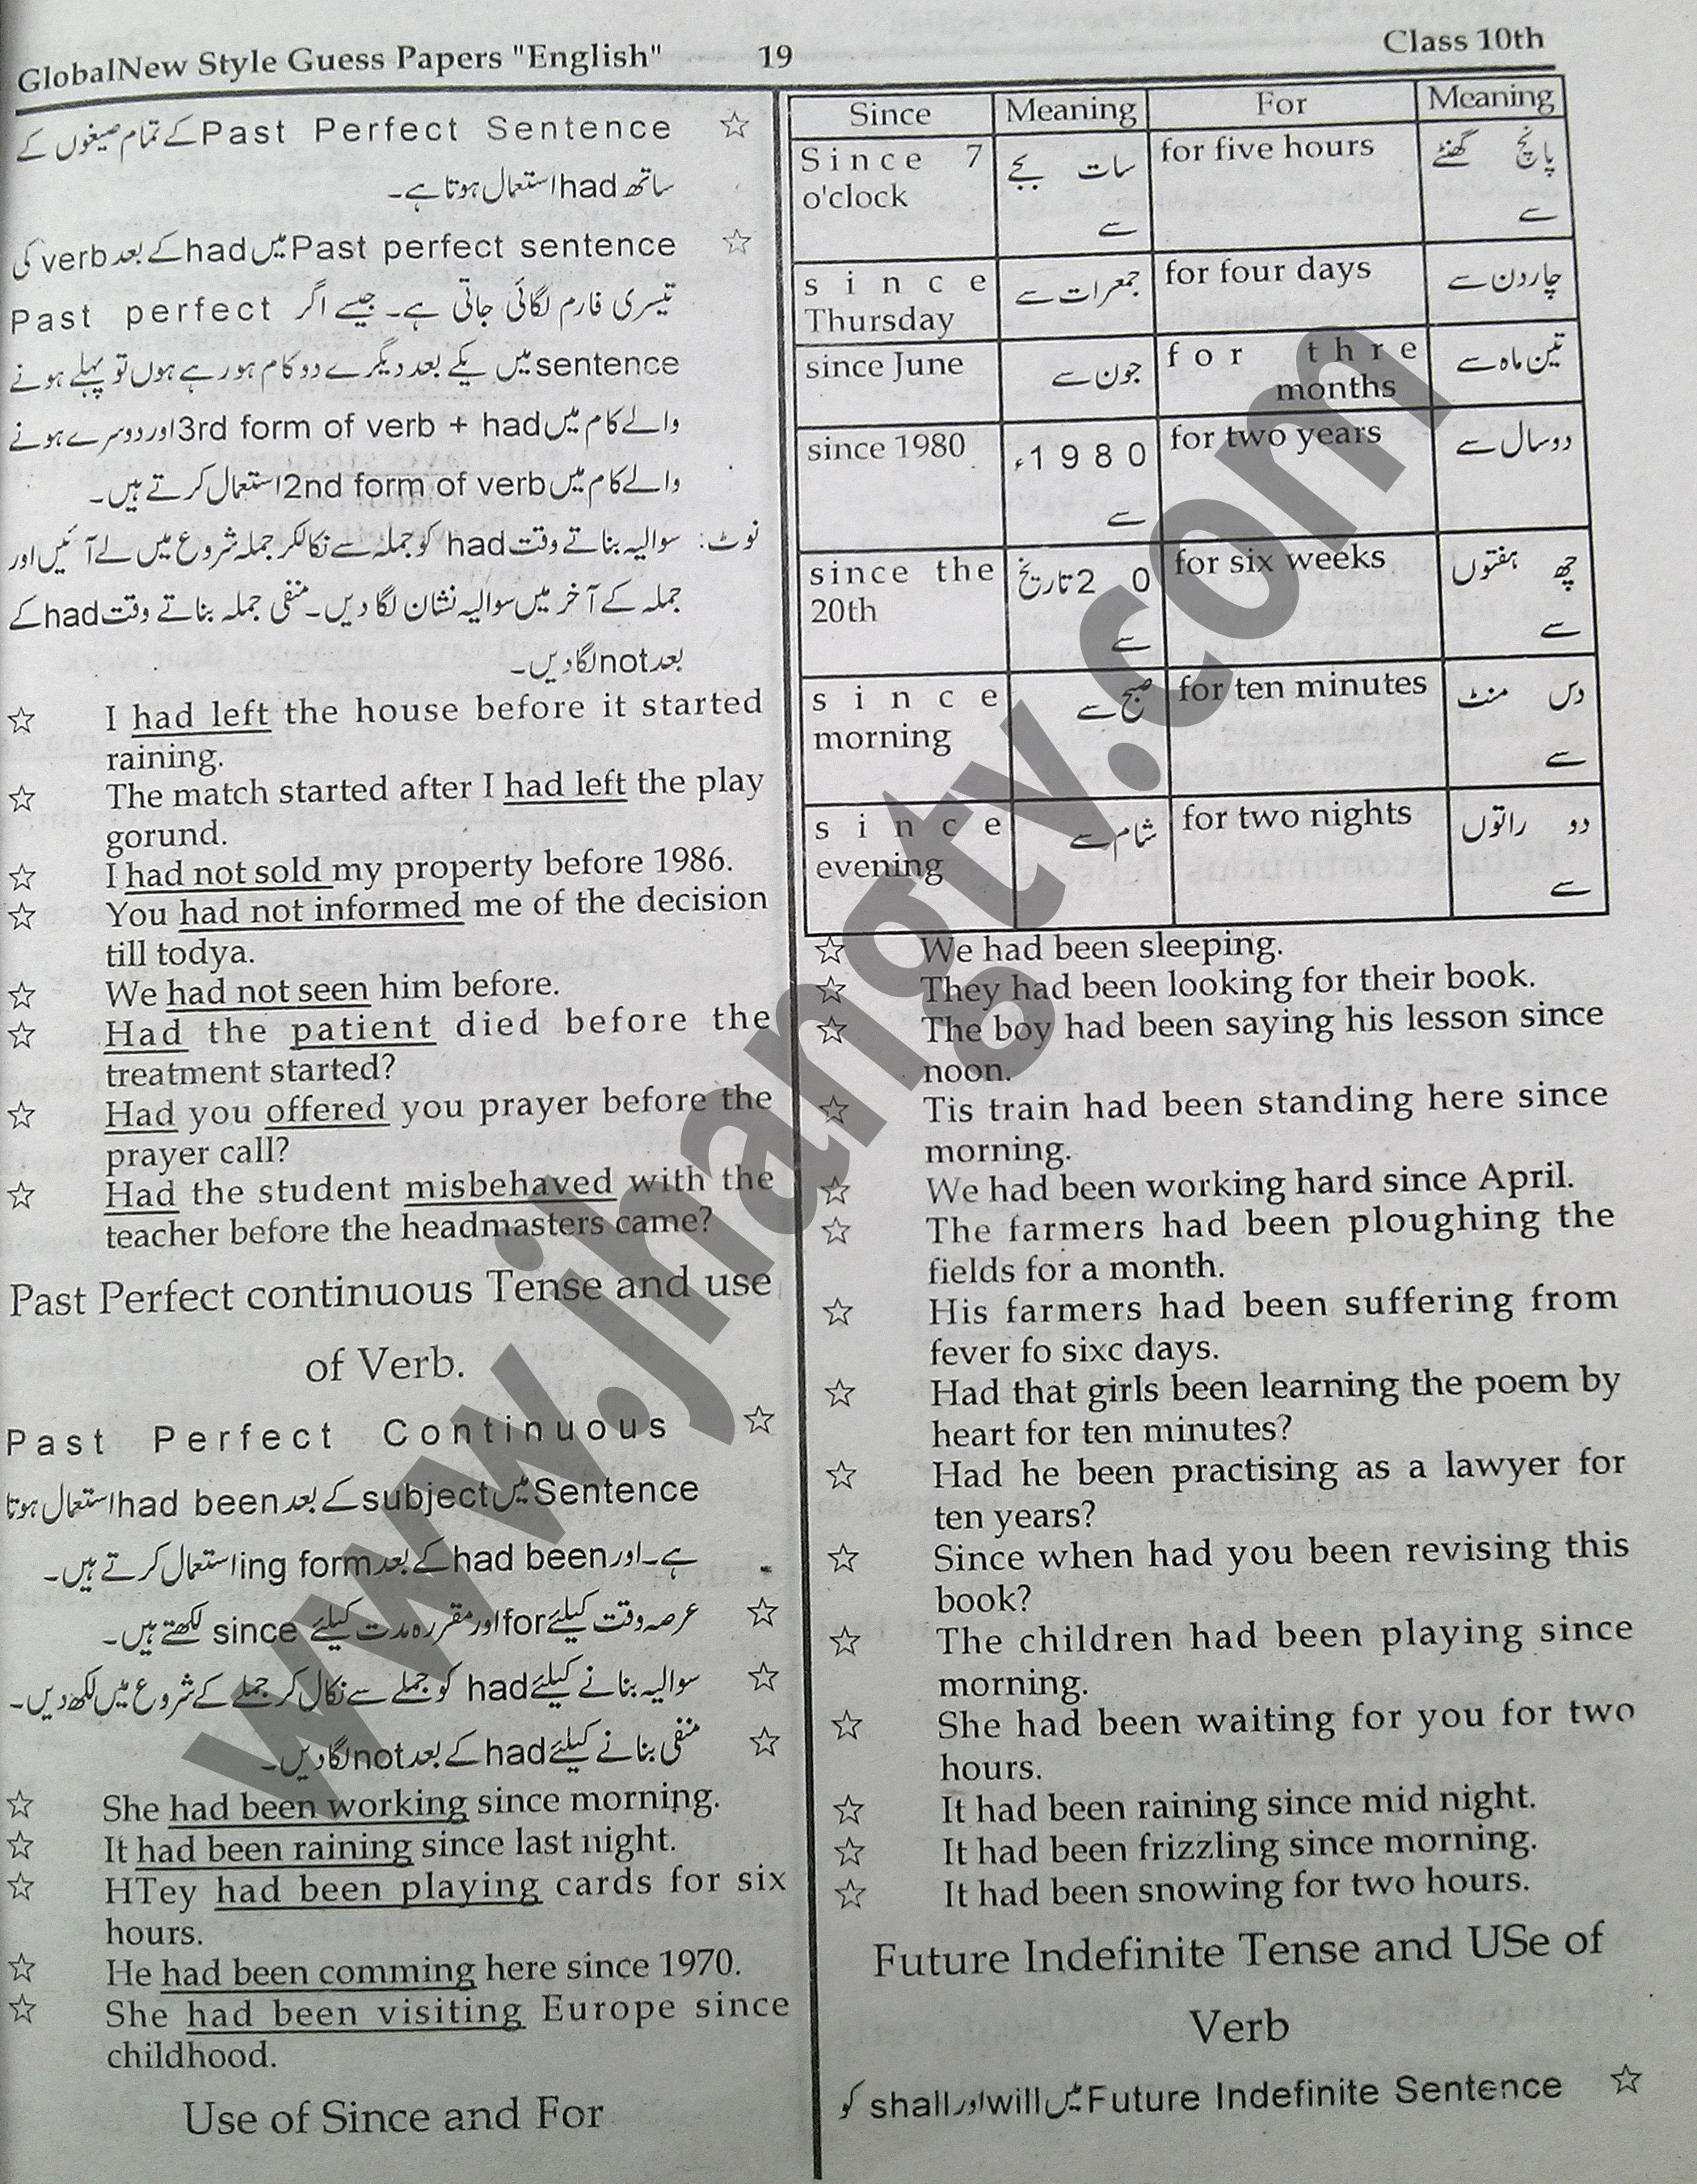 10th Class Guess Papers 2015 English (19)